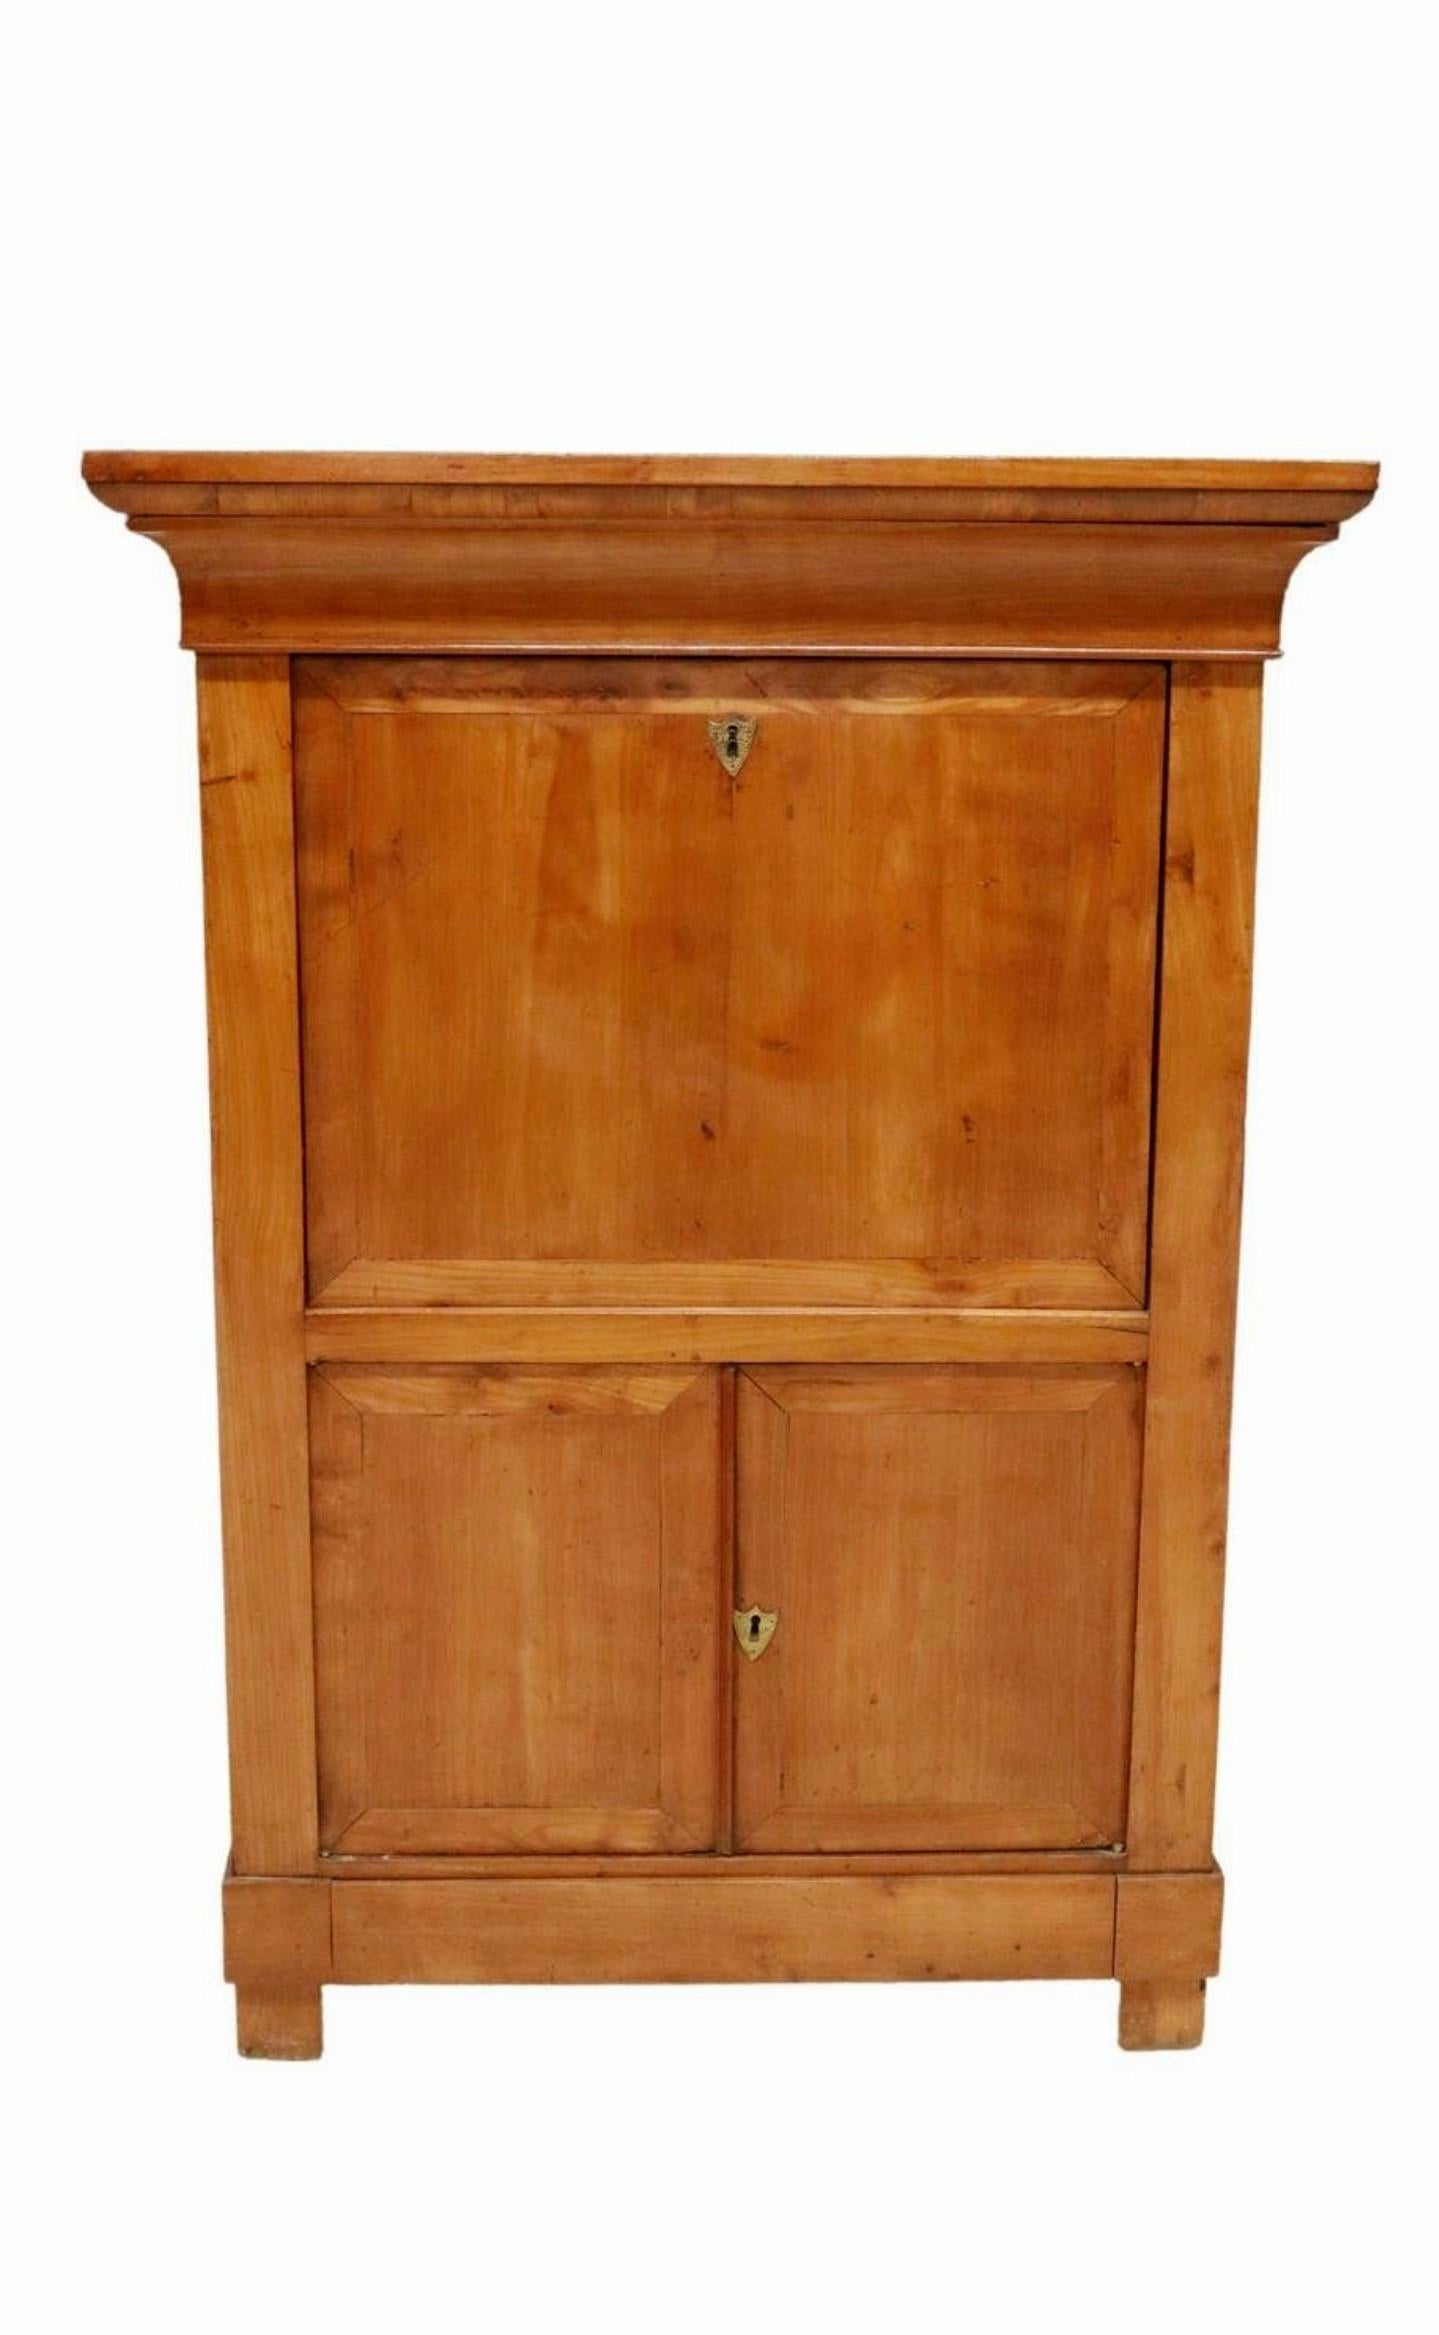 A Louis Philippe period (1830–1848) fruitwood secretaire abattant fall front desk.

Born in France in the mid-19th century, hand-crafted of rich solid fruitwood with warm wood tones, subtle grain detail, and nicely aged mellow patina over the